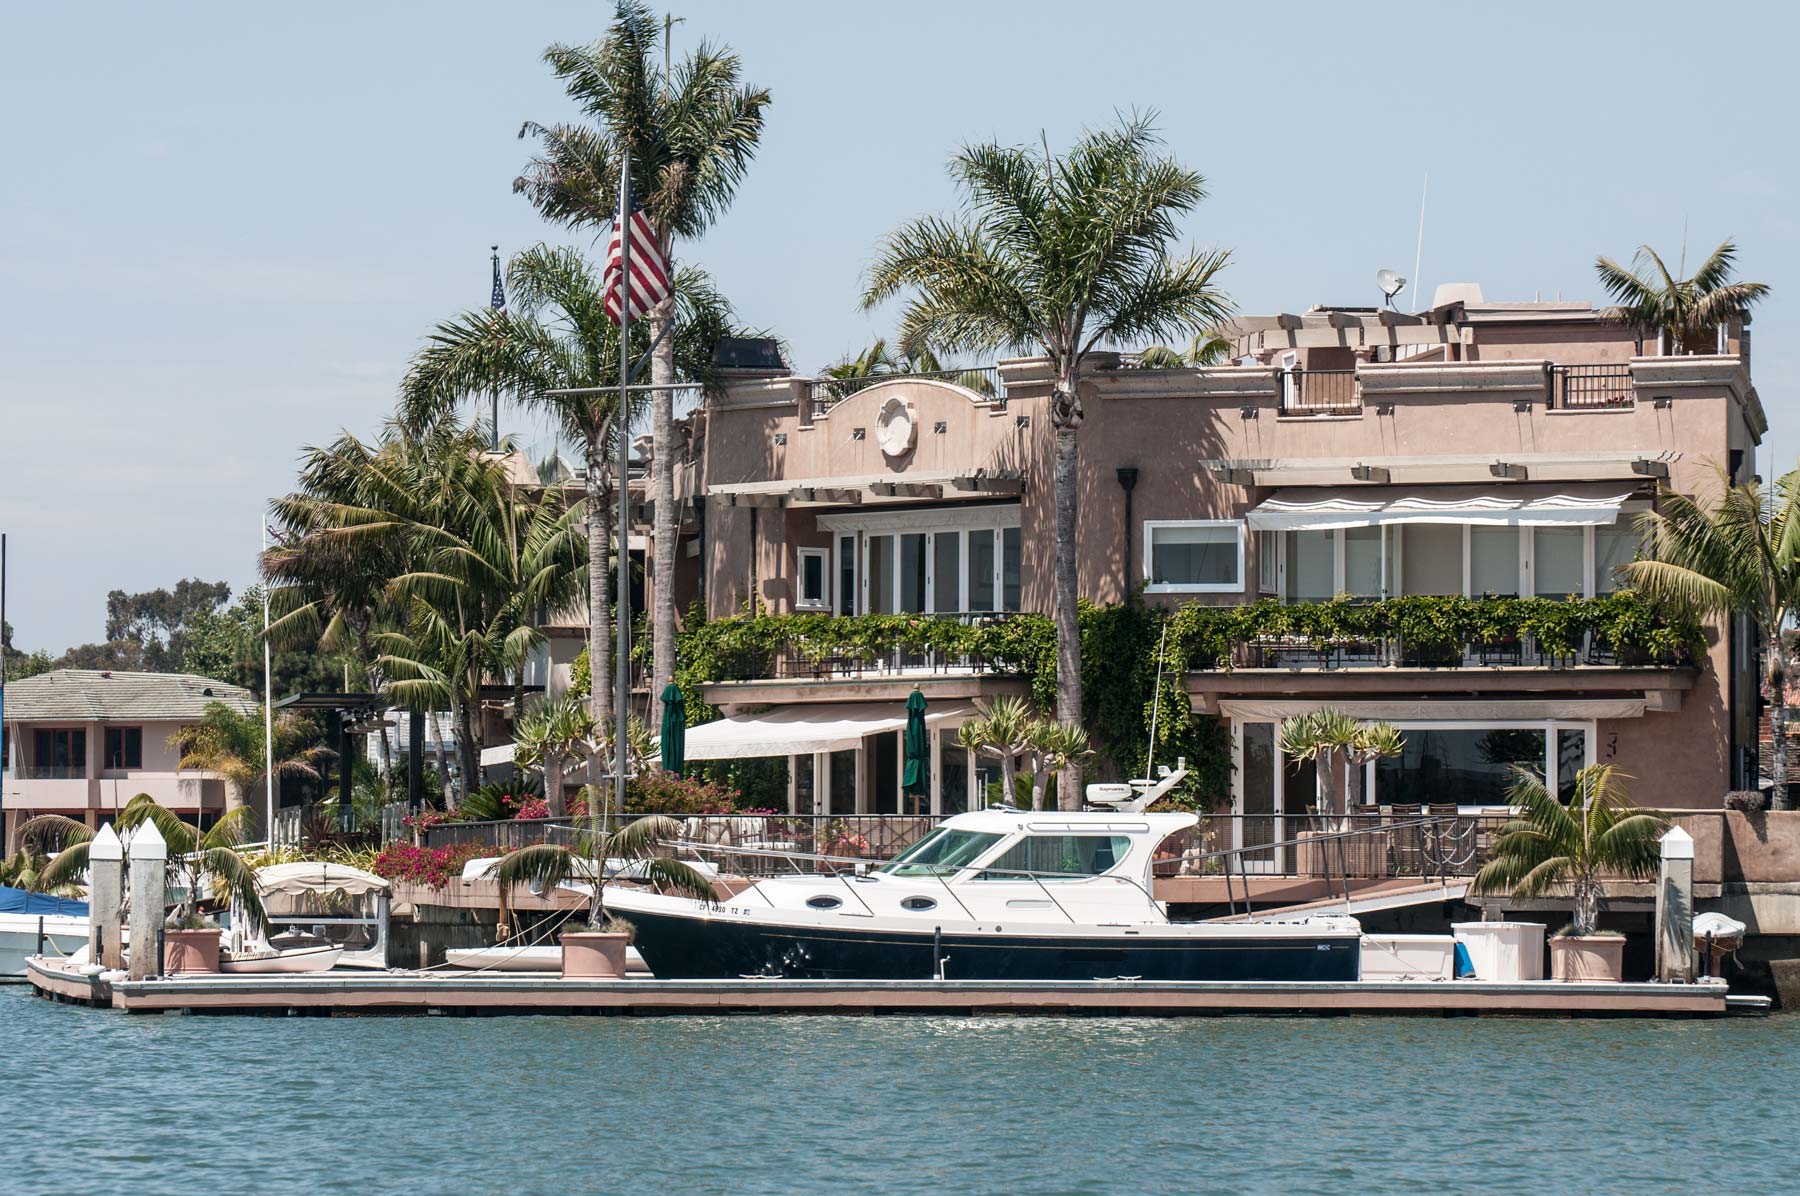 Yacht in front of Mansion in Newport Harbor